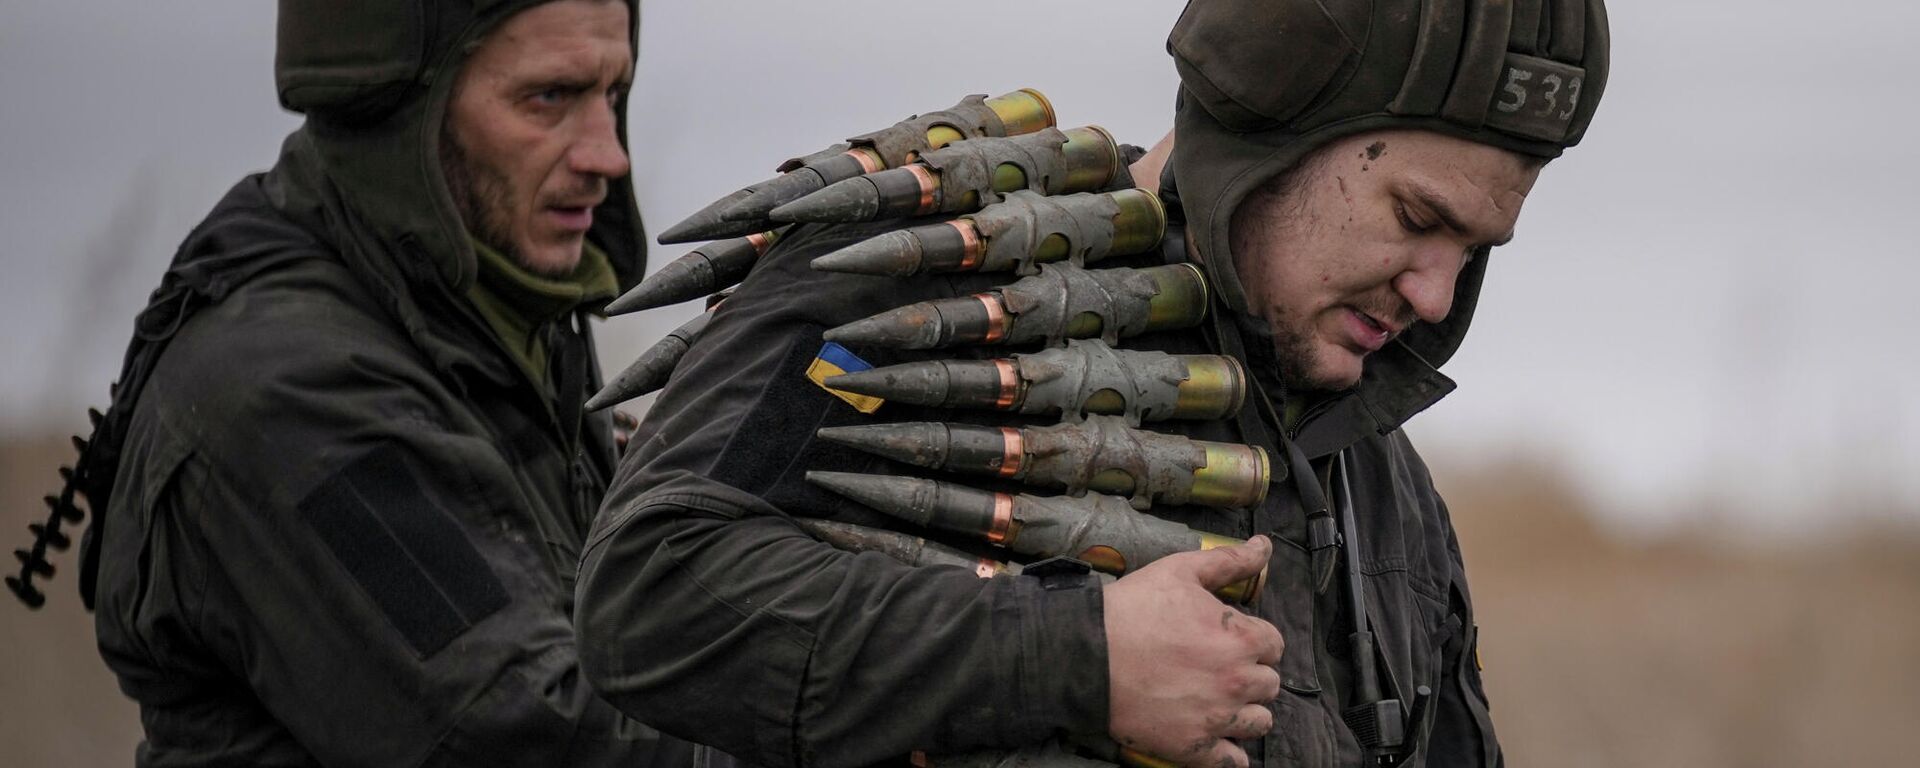 A Ukrainian serviceman carries large caliber ammunitions for armored fighting vehicles mounted weapons during an exercise in a Joint Forces Operation controlled area in the Donetsk region, eastern Ukraine, Feb. 10, 2022. - Sputnik International, 1920, 15.02.2022